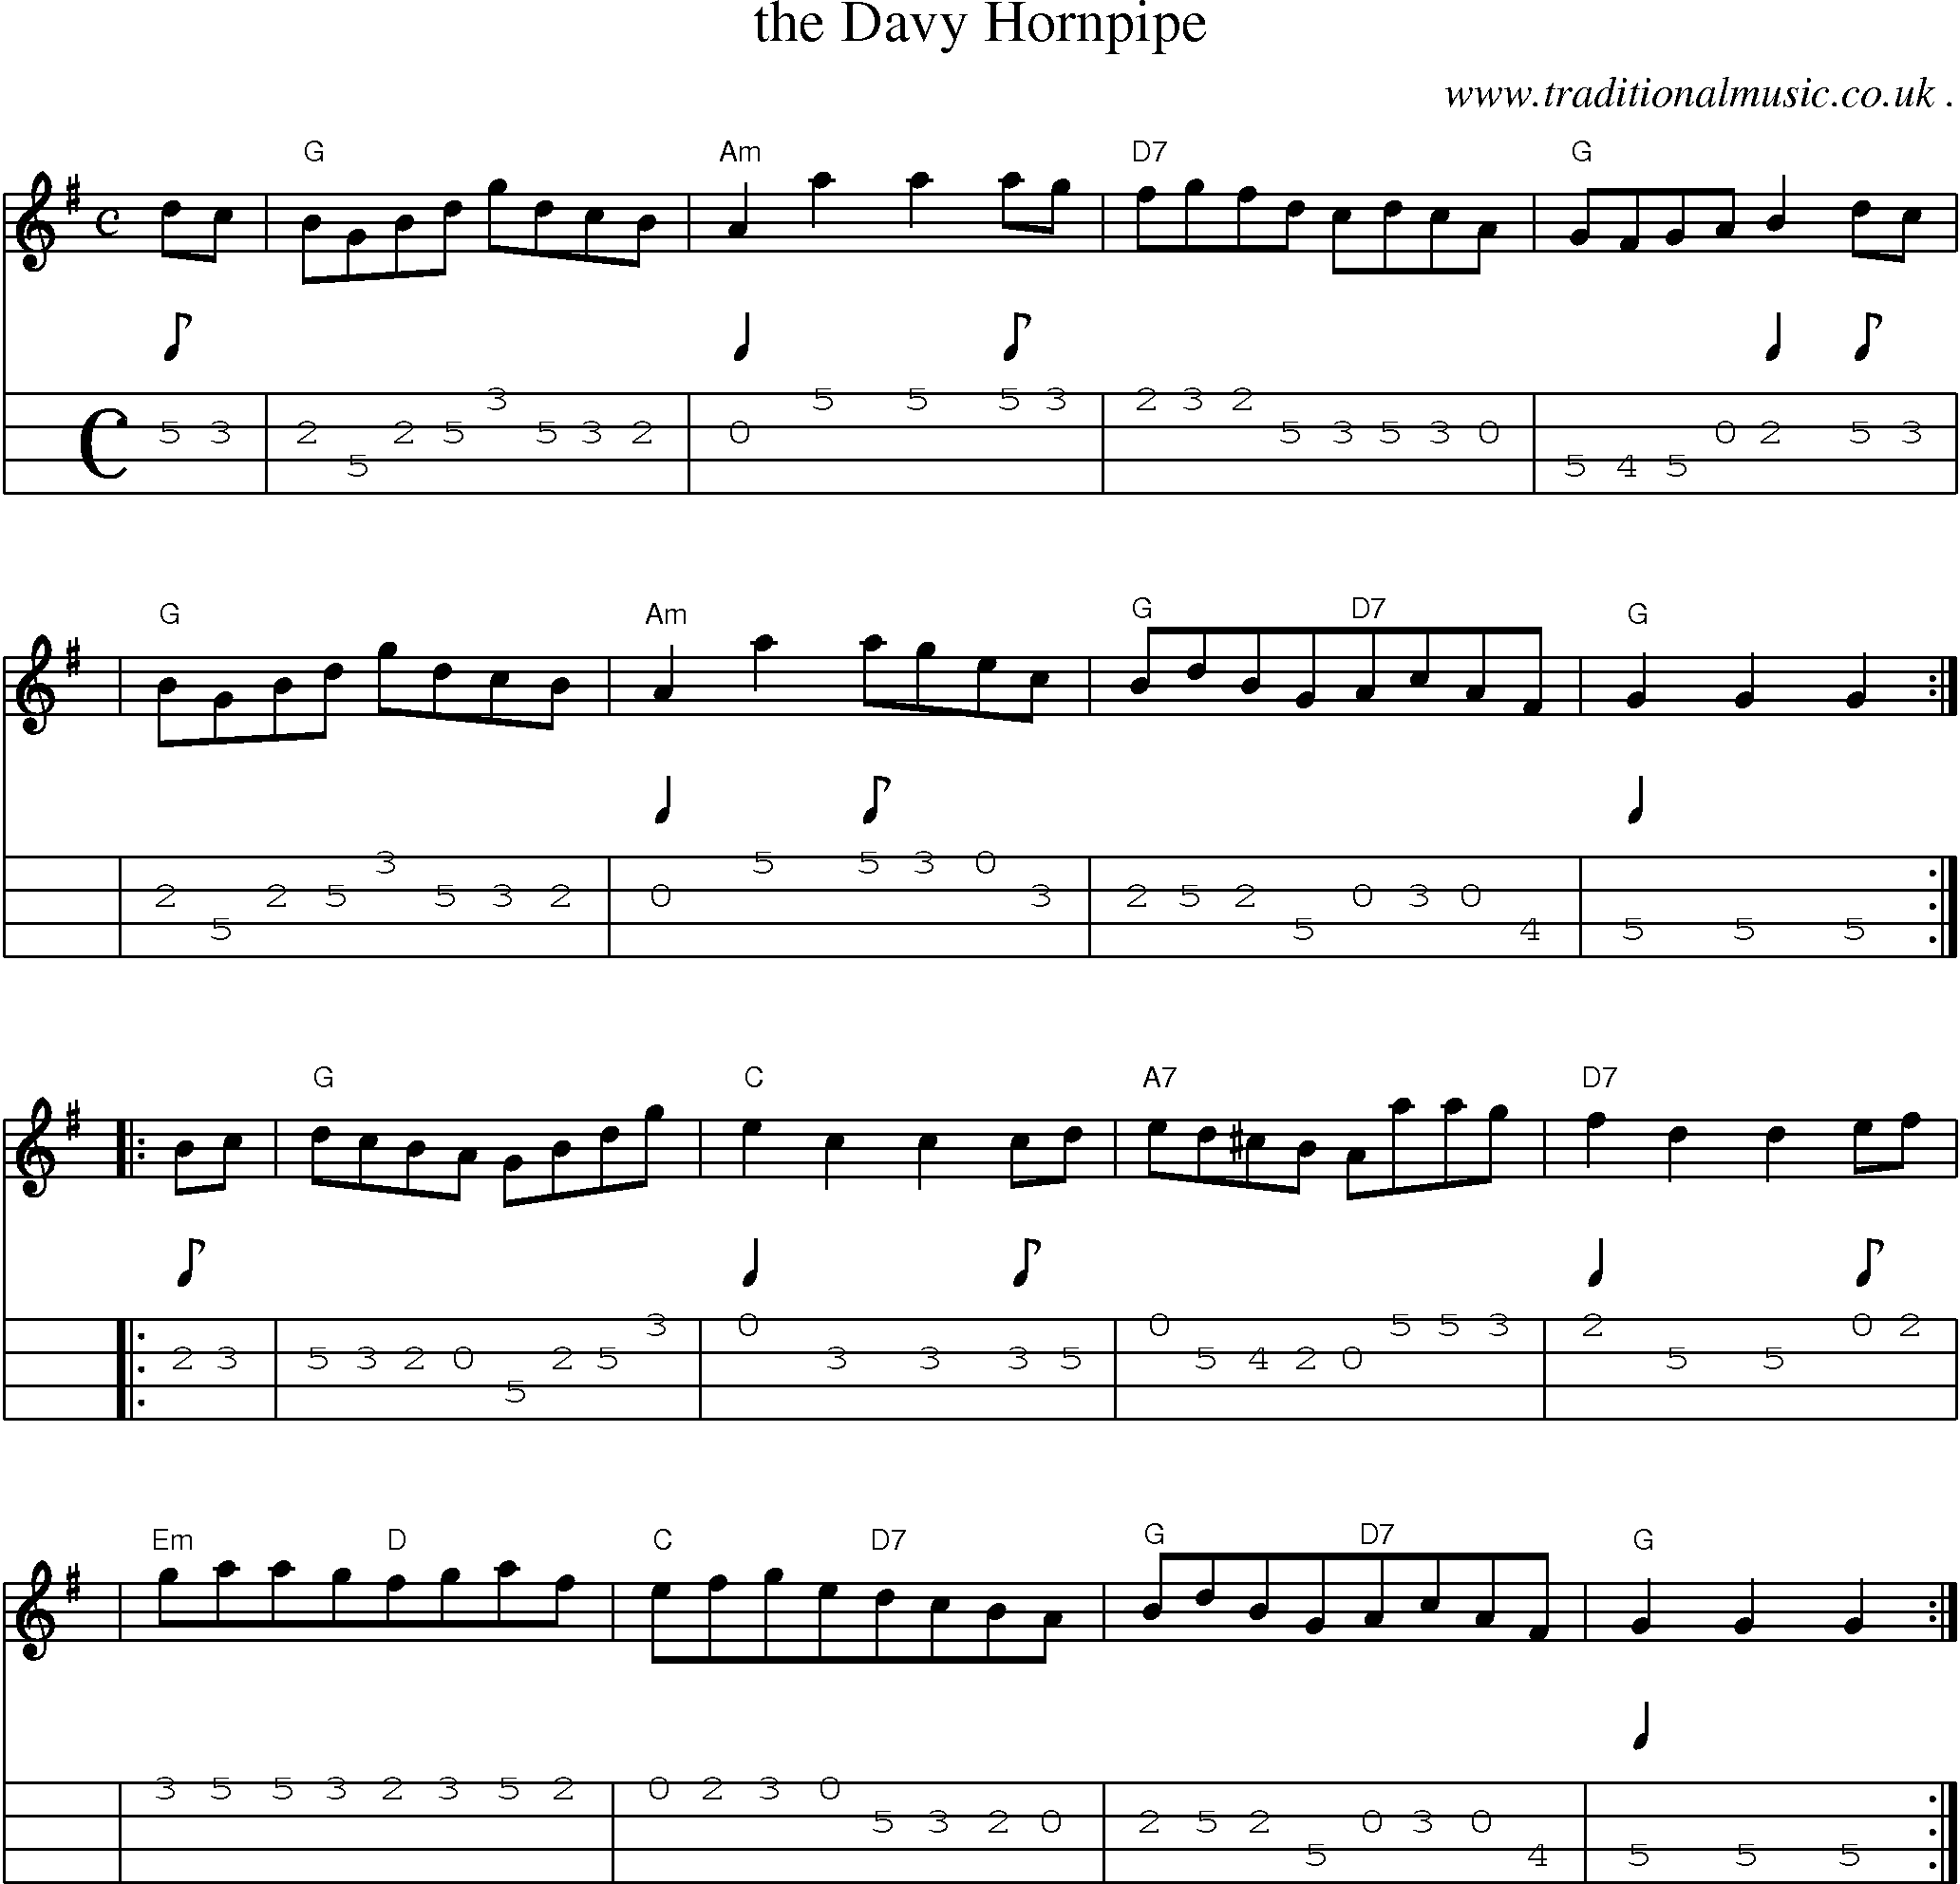 Sheet-Music and Mandolin Tabs for The Davy Hornpipe